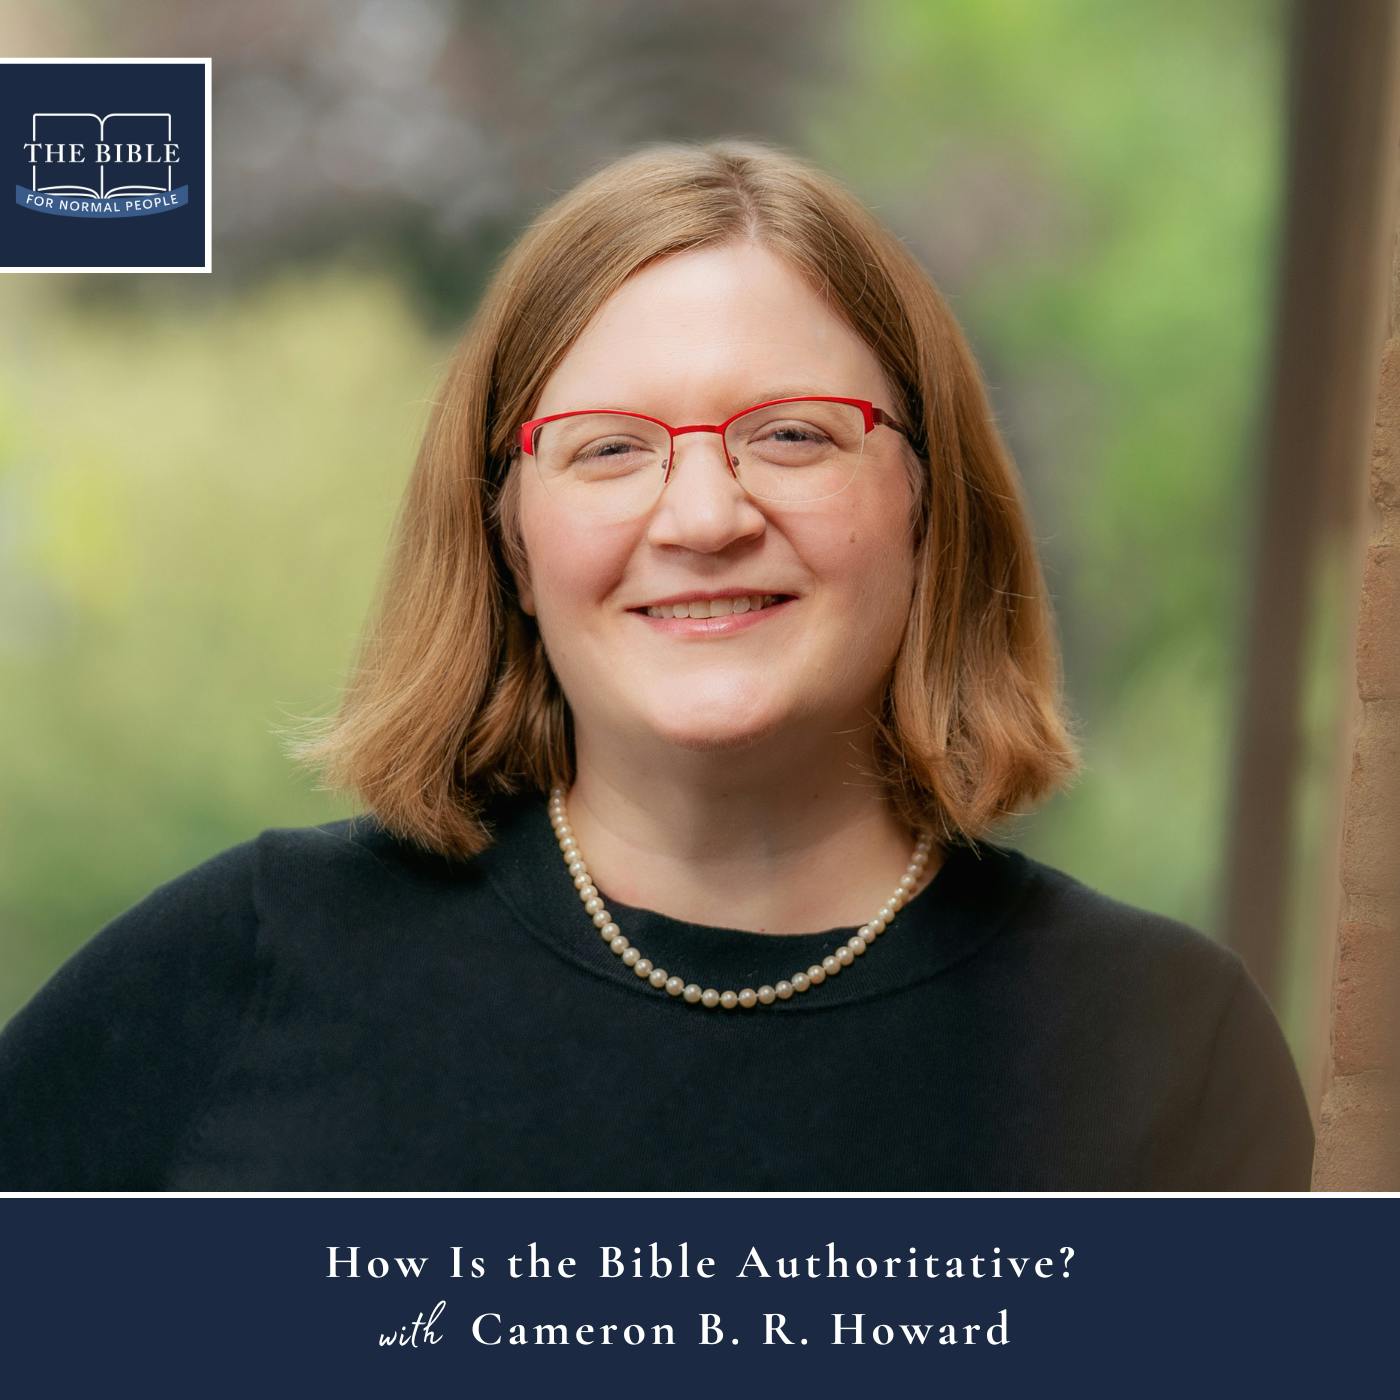 [Bible] Episode 239: Cameron B. R. Howard - How Is the Bible Authoritative?